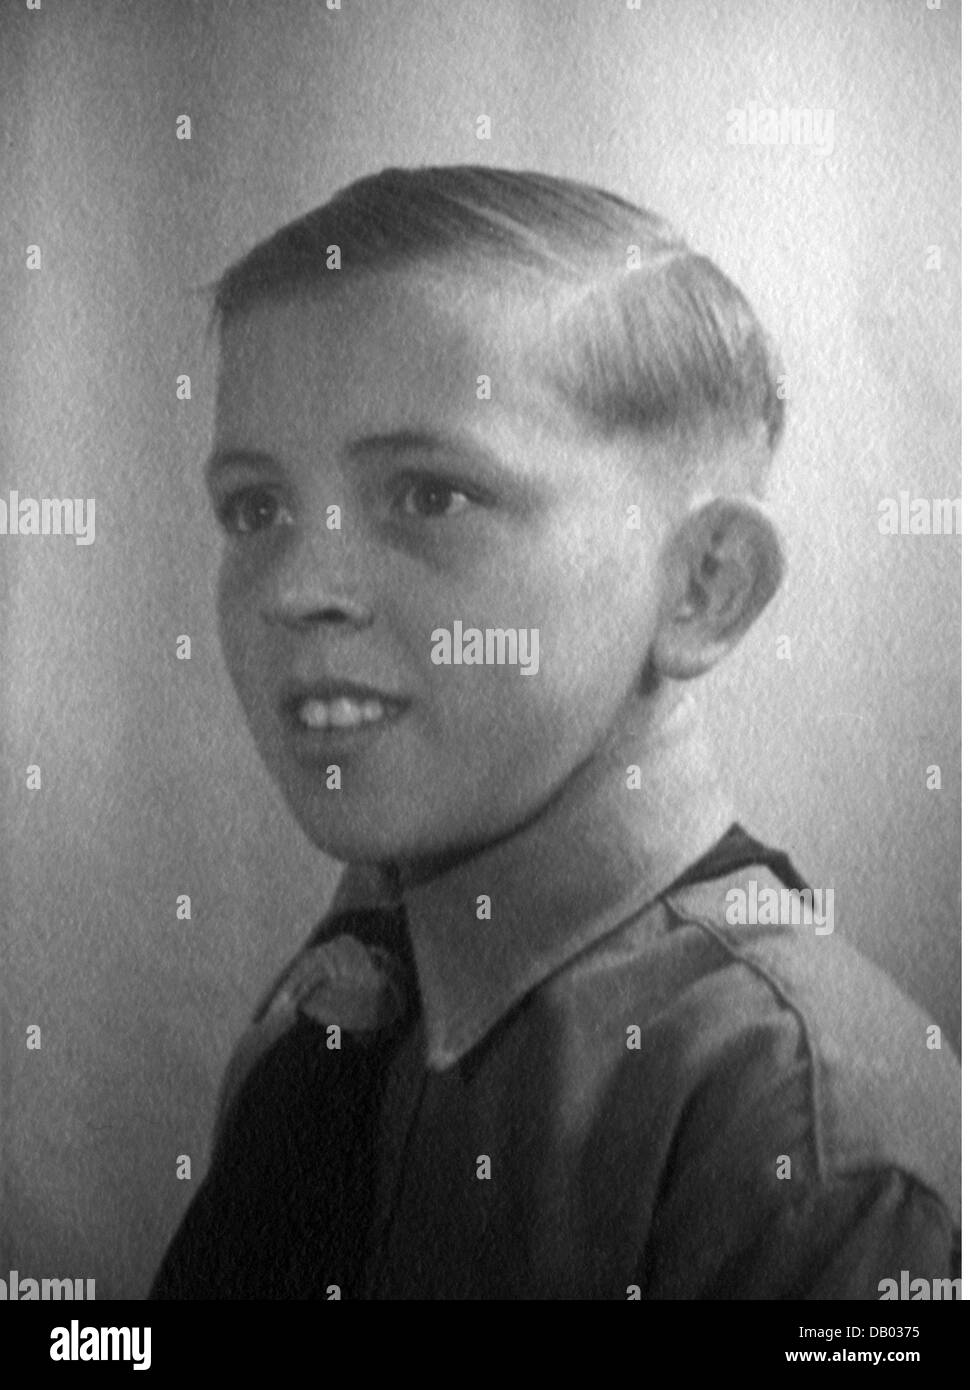 National Socialism, organisations, Hitler Youth (Hitlerjugend, HJ), German Youth (Deutsches Jungvolk, DJ), boy, portrait, 1943, Additional-Rights-Clearences-Not Available Stock Photo